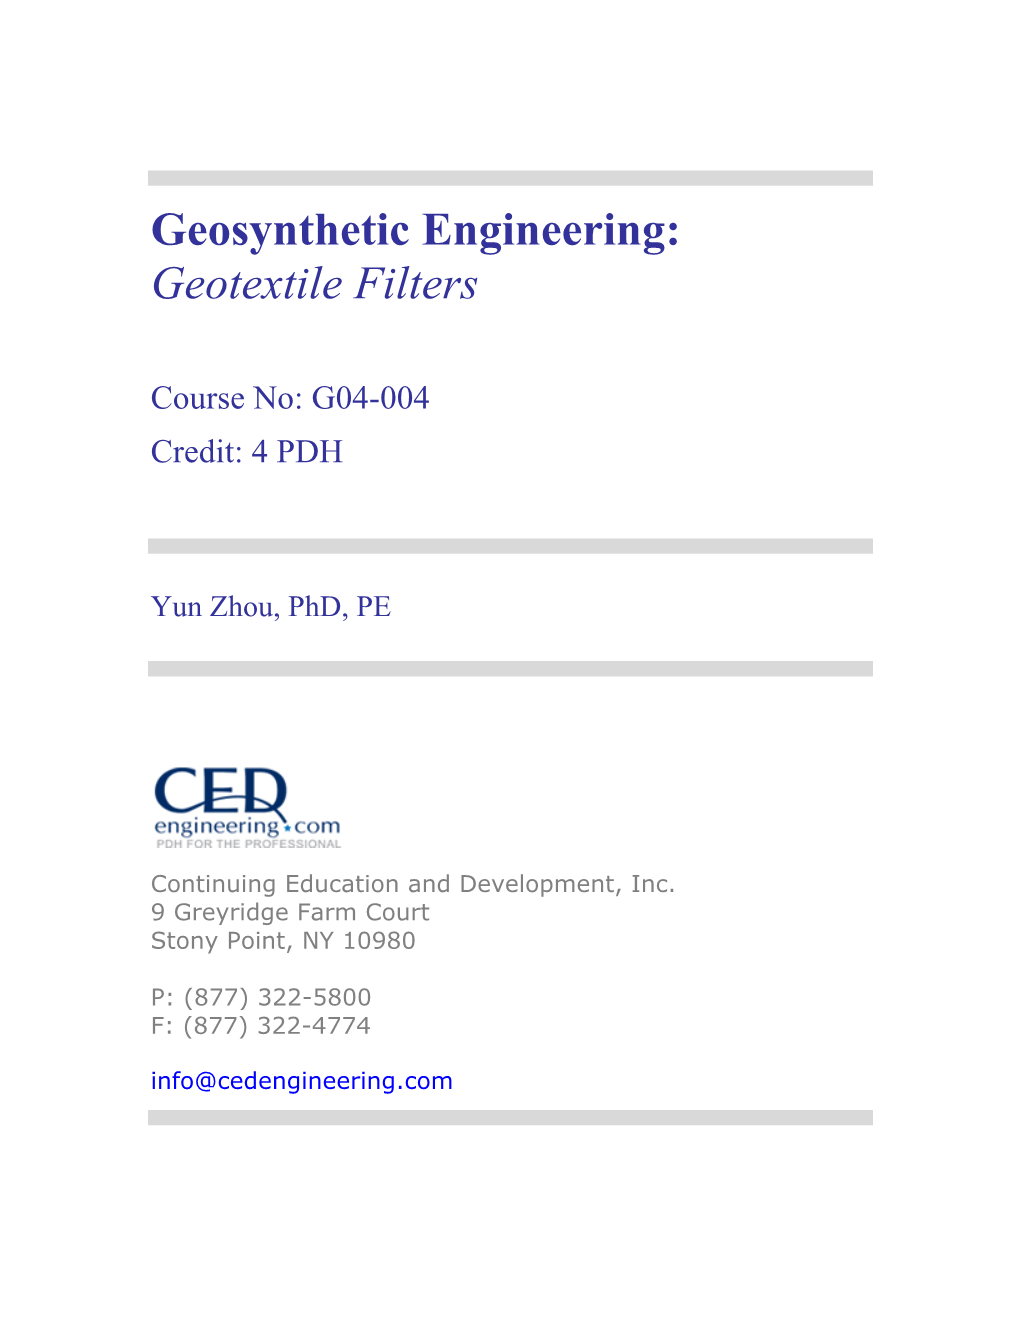 Geosynthetic Engineering: Geotextile Filters